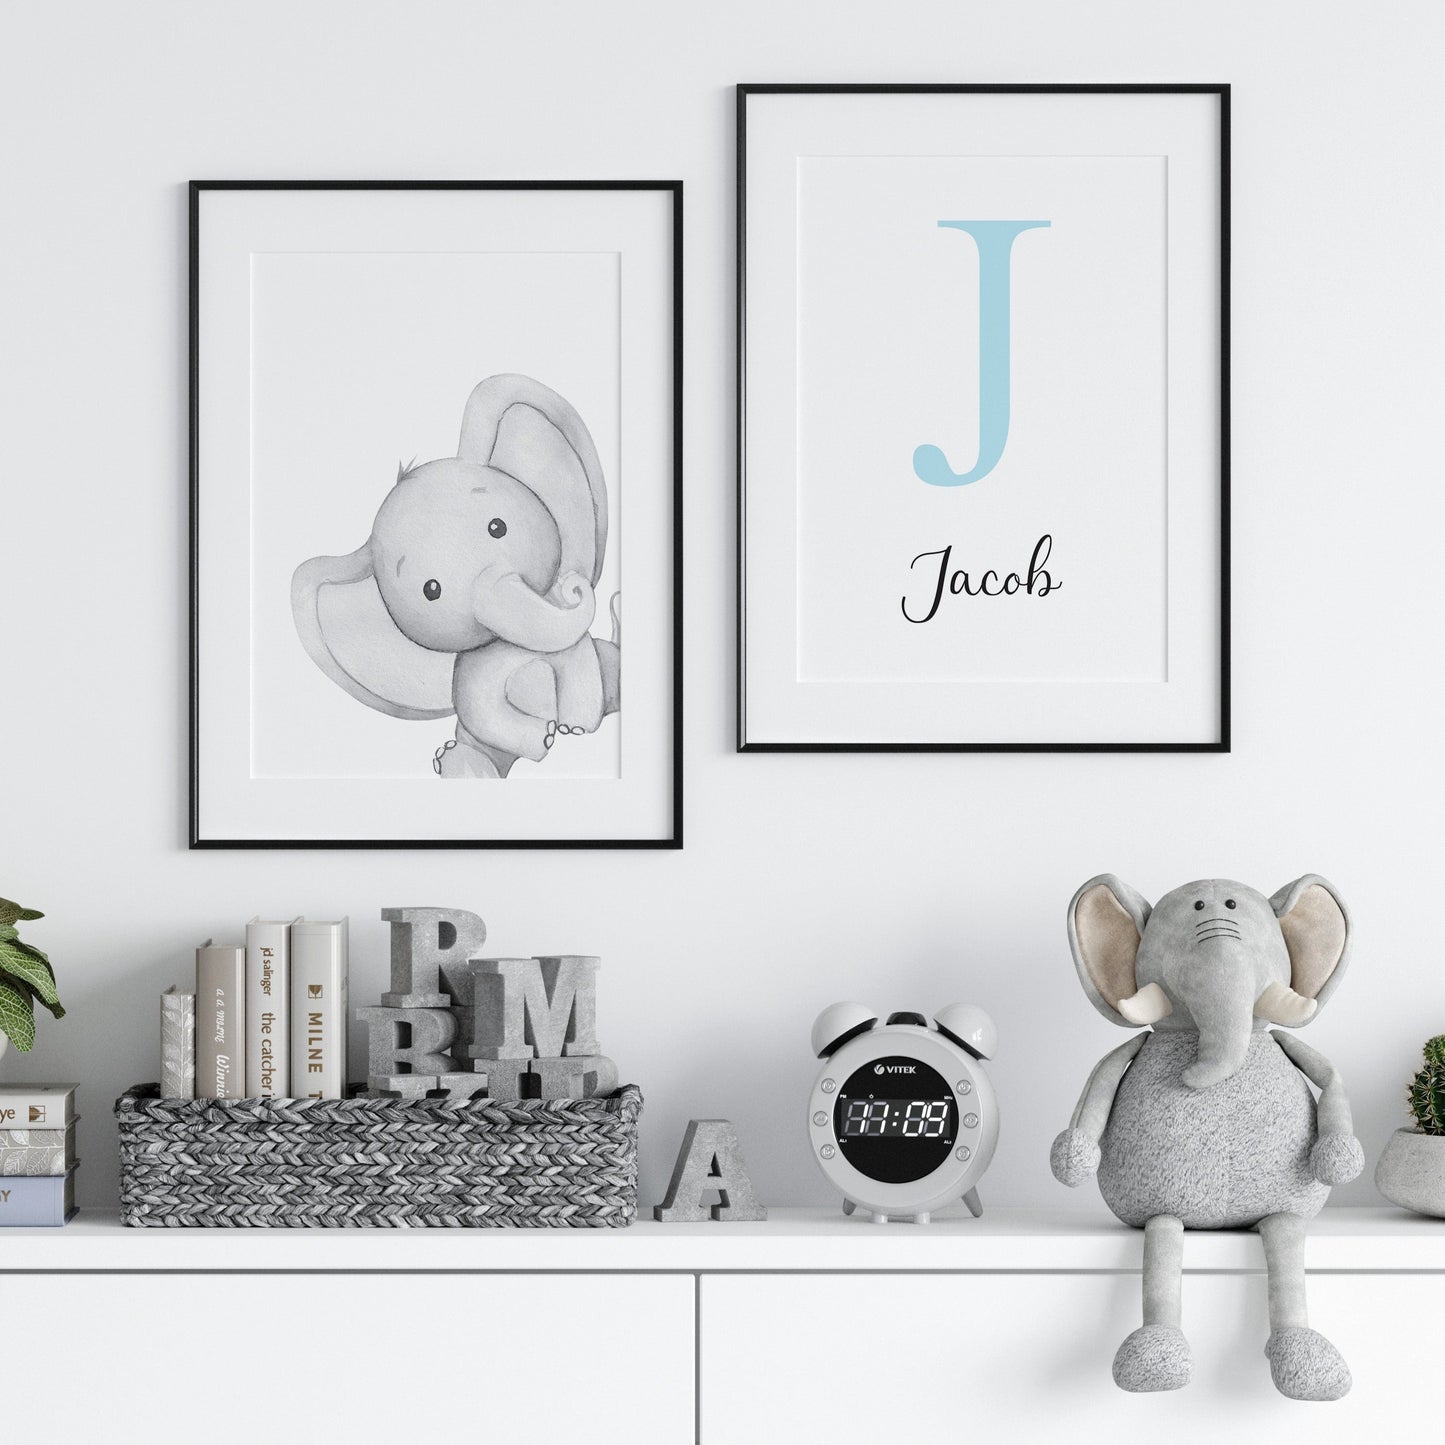 Grey elephant printed onto white paper hung in a black froame with a light blue initial print next to it and cute elephant plush sitting on a shelf - Dolly and Fred